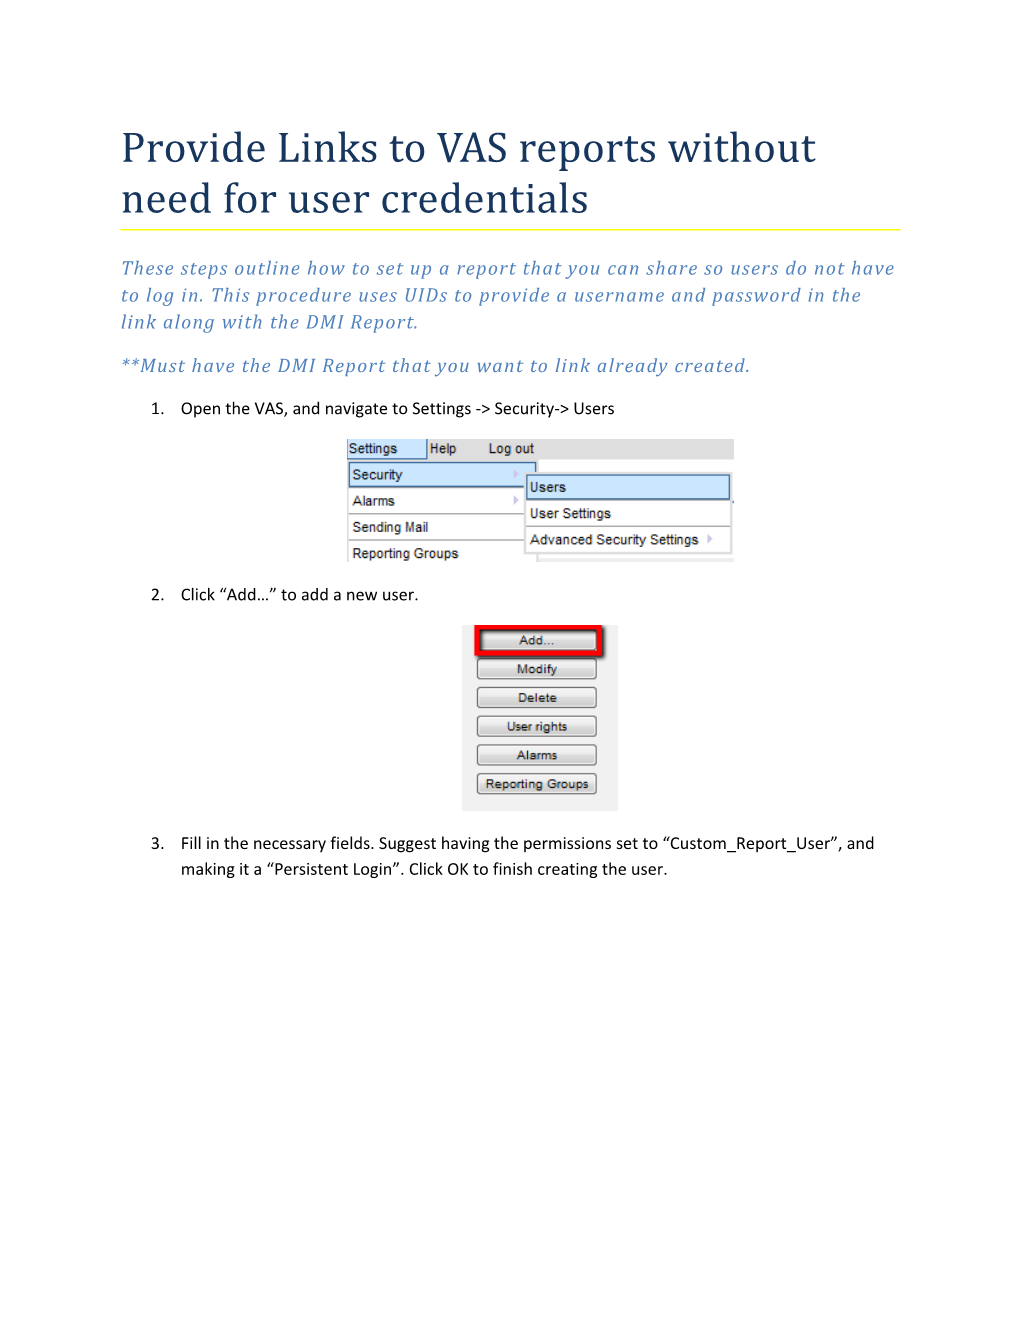 Provide Links to VAS Reports Without Need for User Credentials